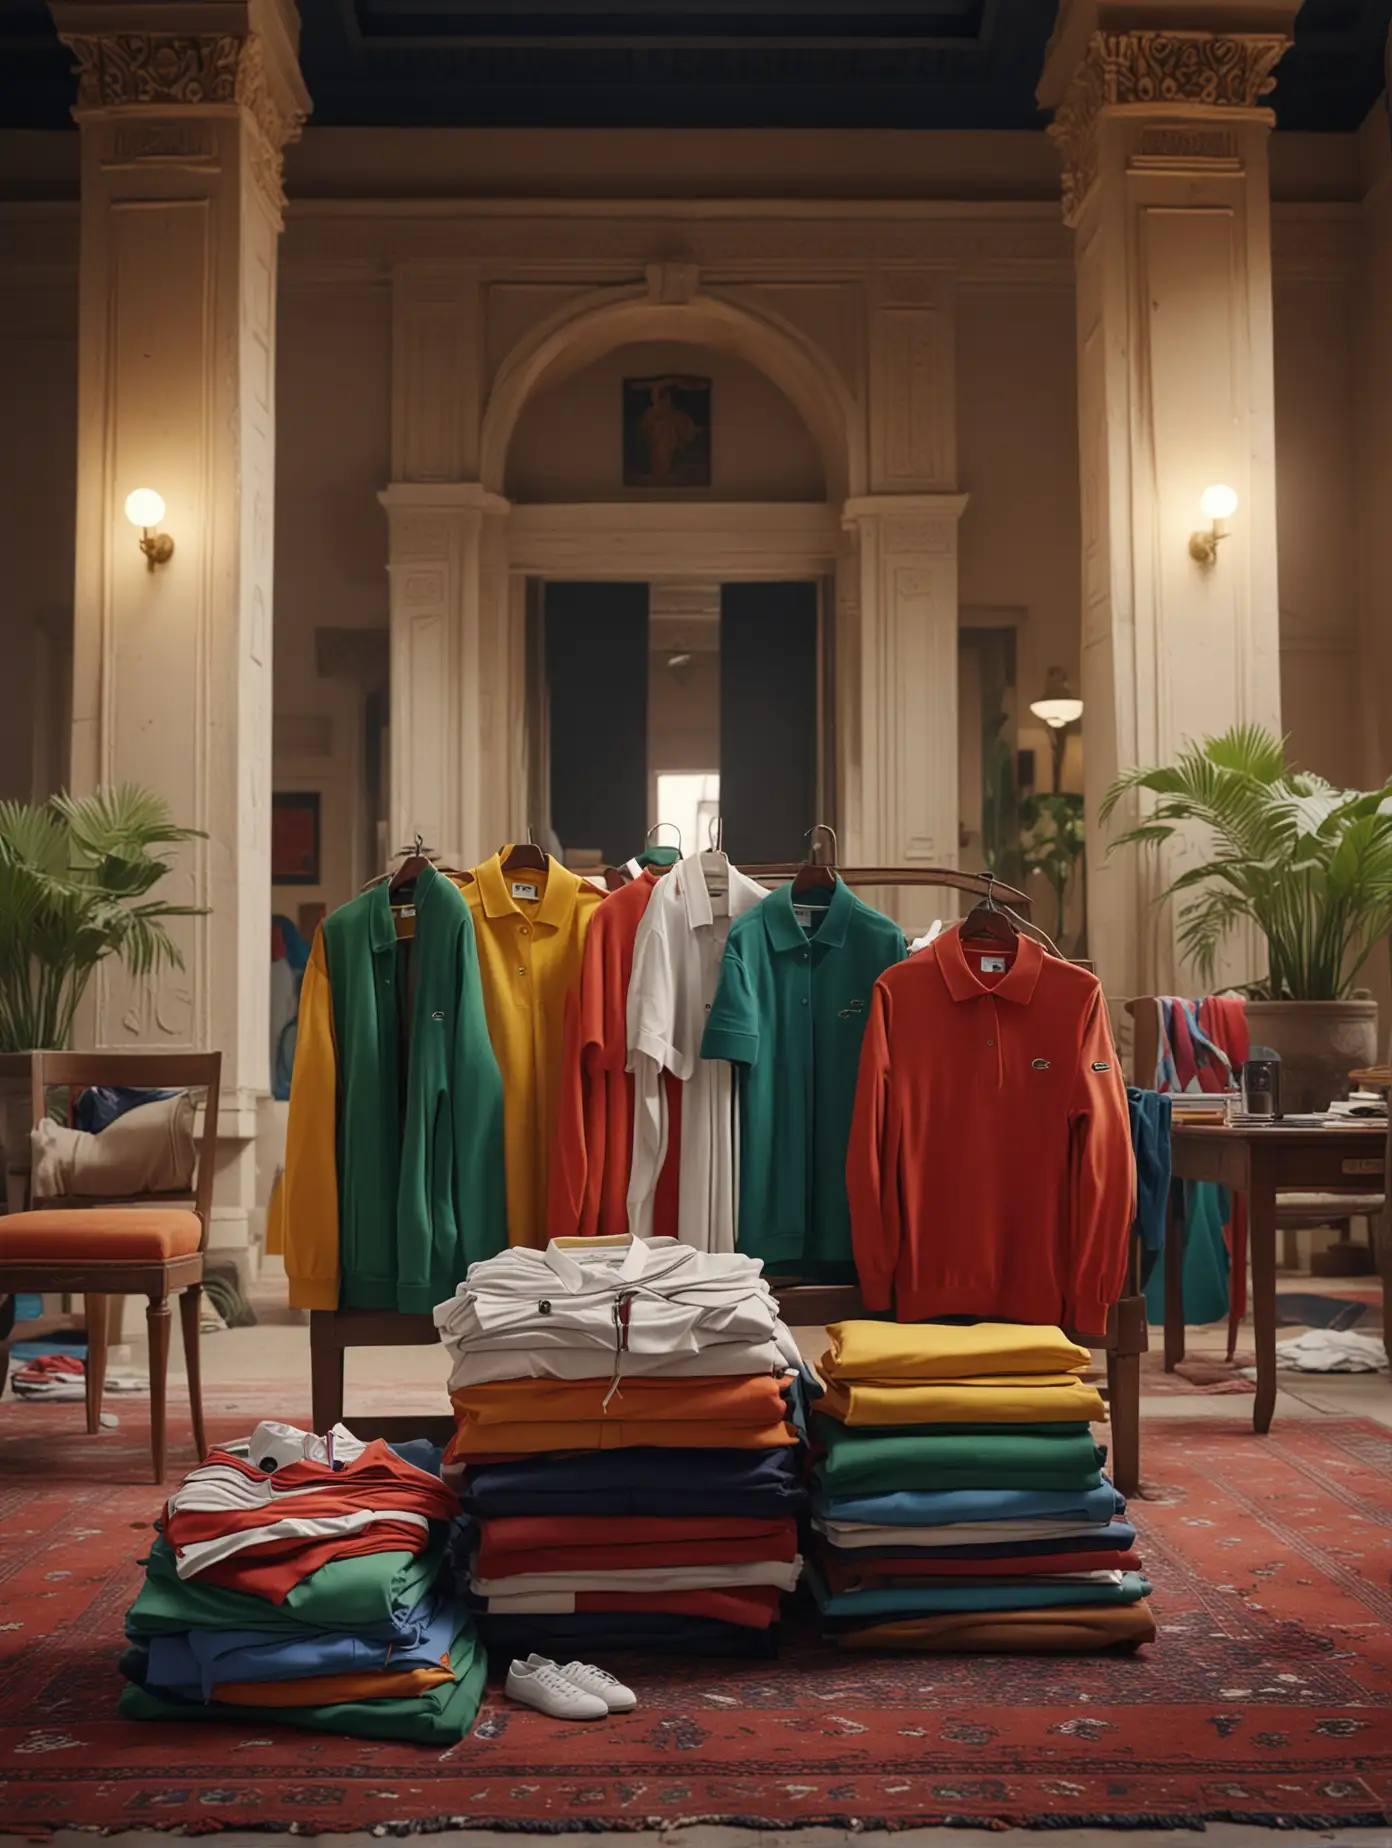 Vibrant Lacoste Apparel Stacked in Luxurious Egyptian Interior